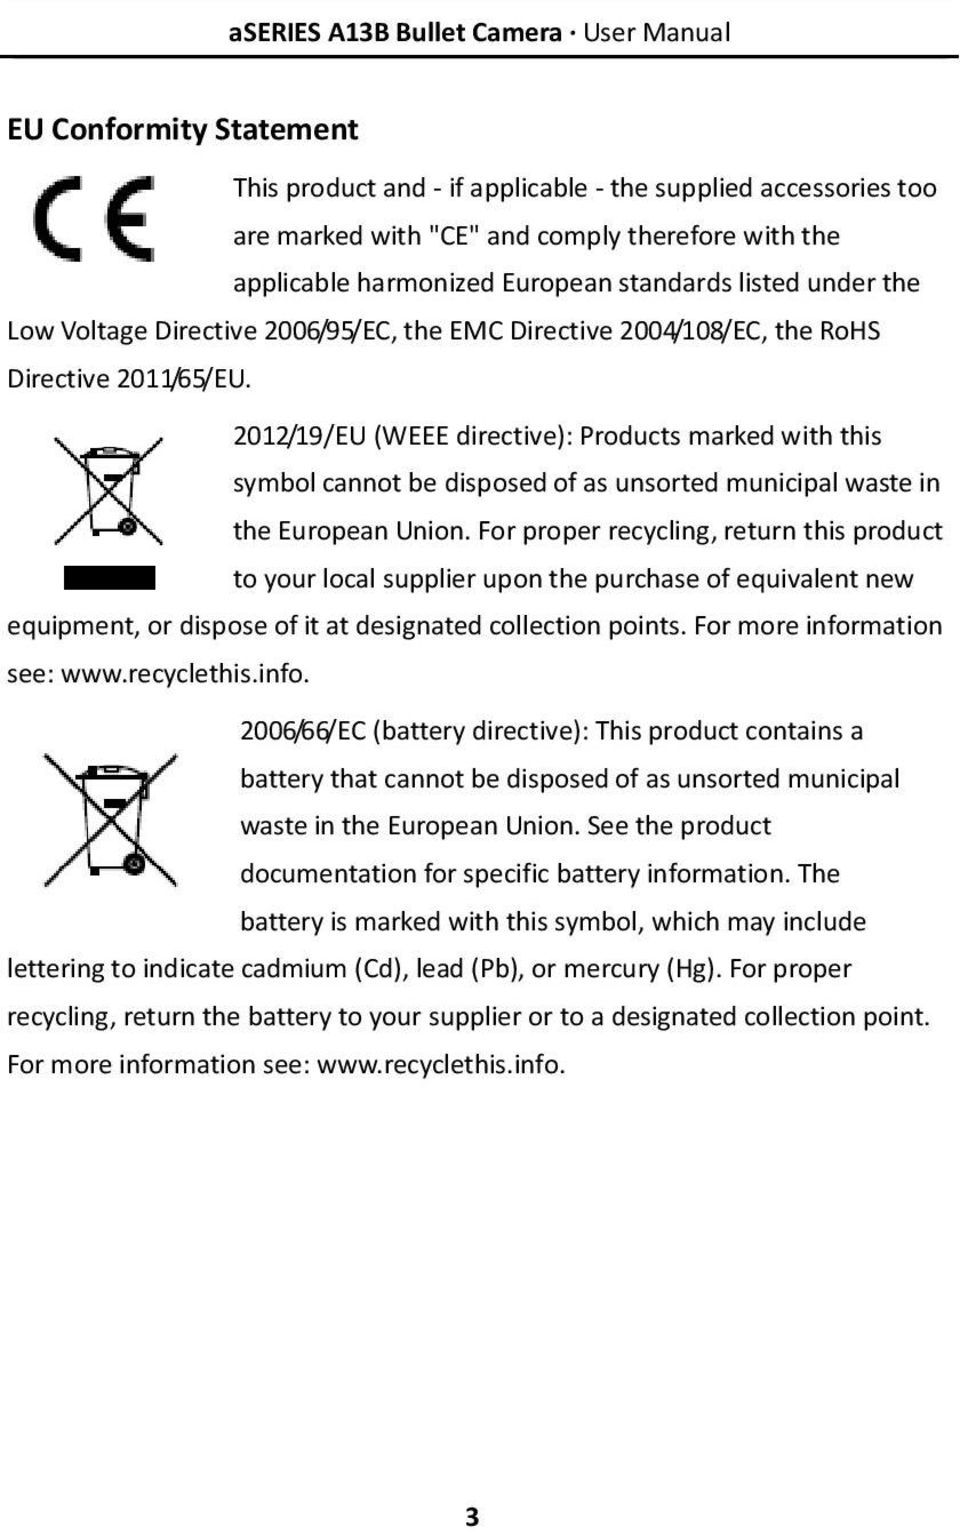 2012/19/EU (WEEE directive): Products marked with this symbol cannot be disposed of as unsorted municipal waste in the European Union.